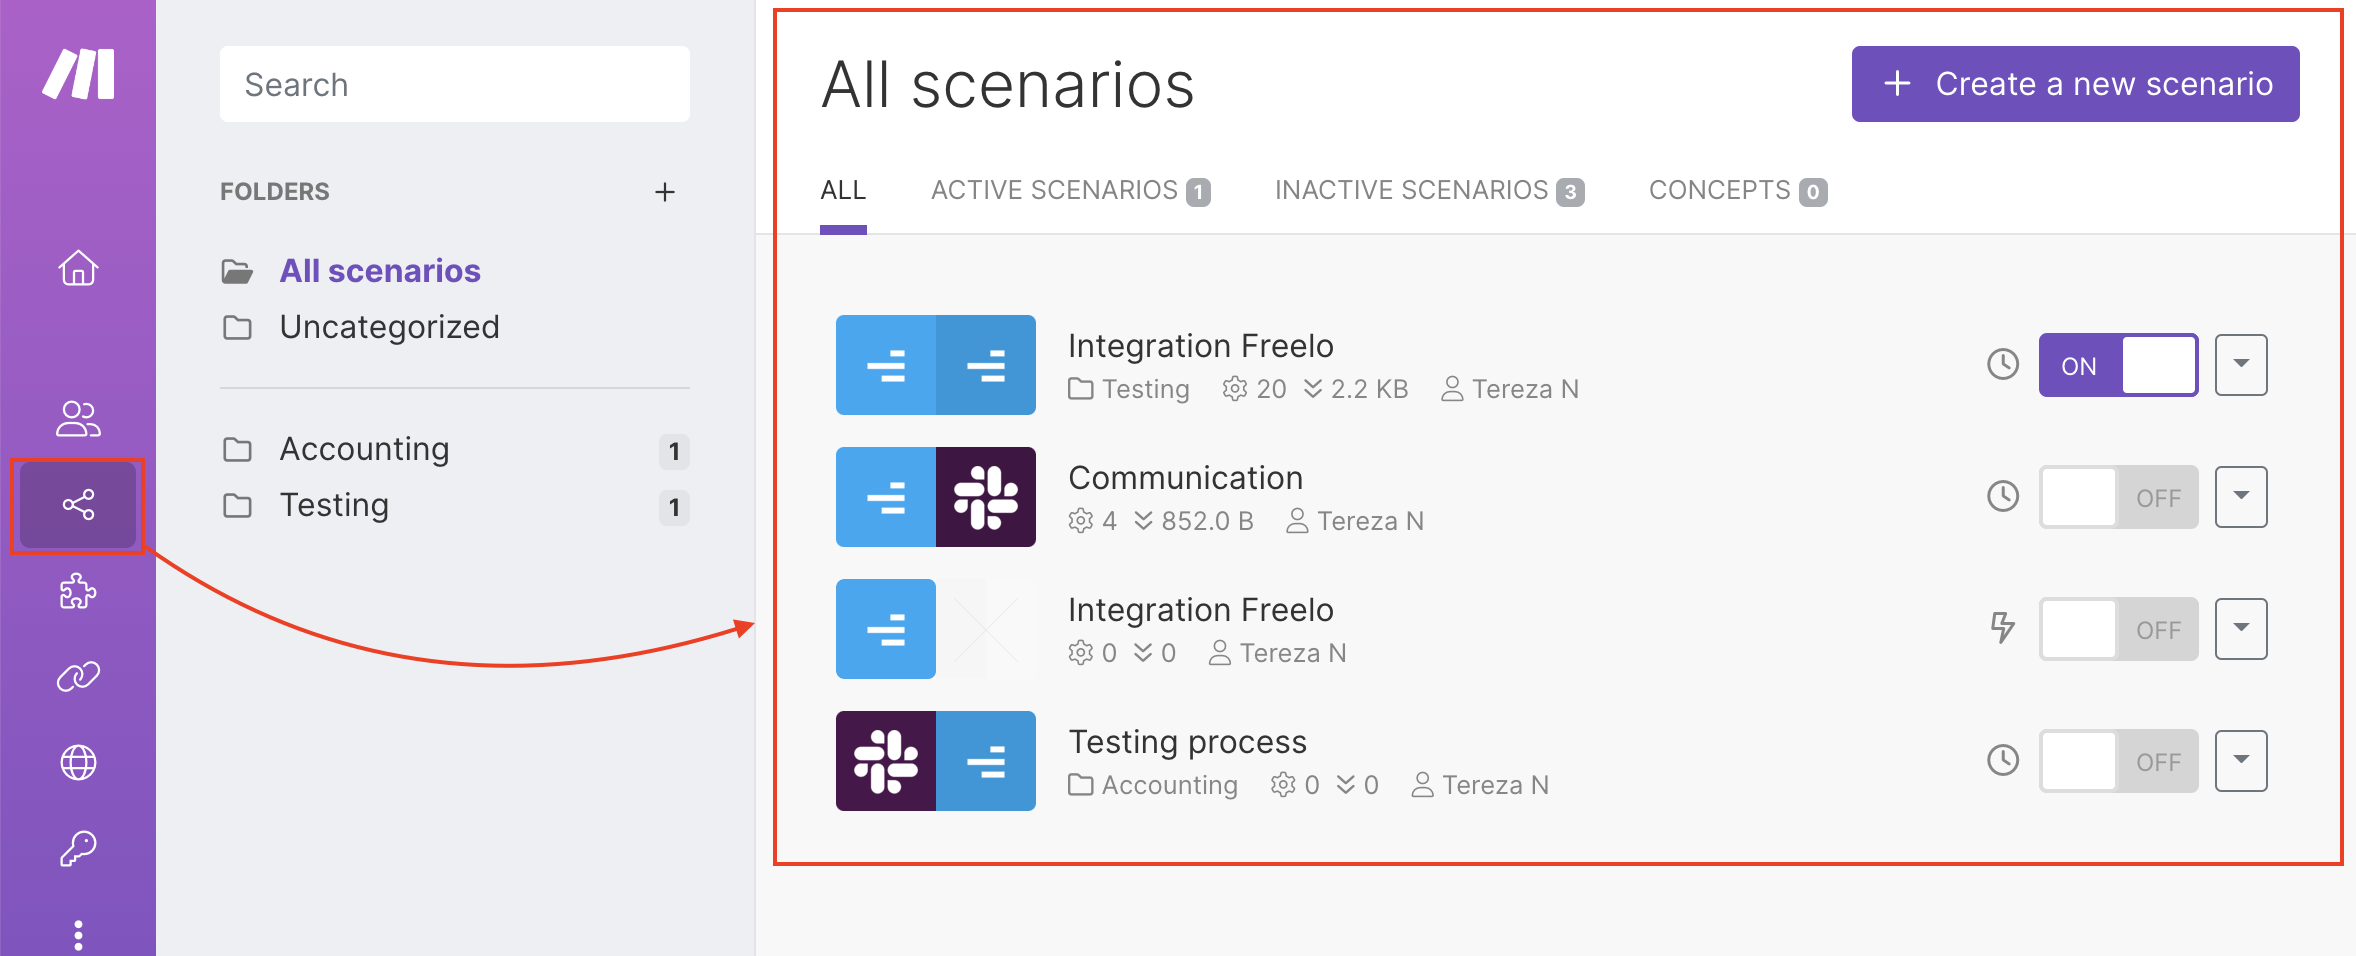 Go to the overview of All scenarios via the Scenarios section in the purple column.